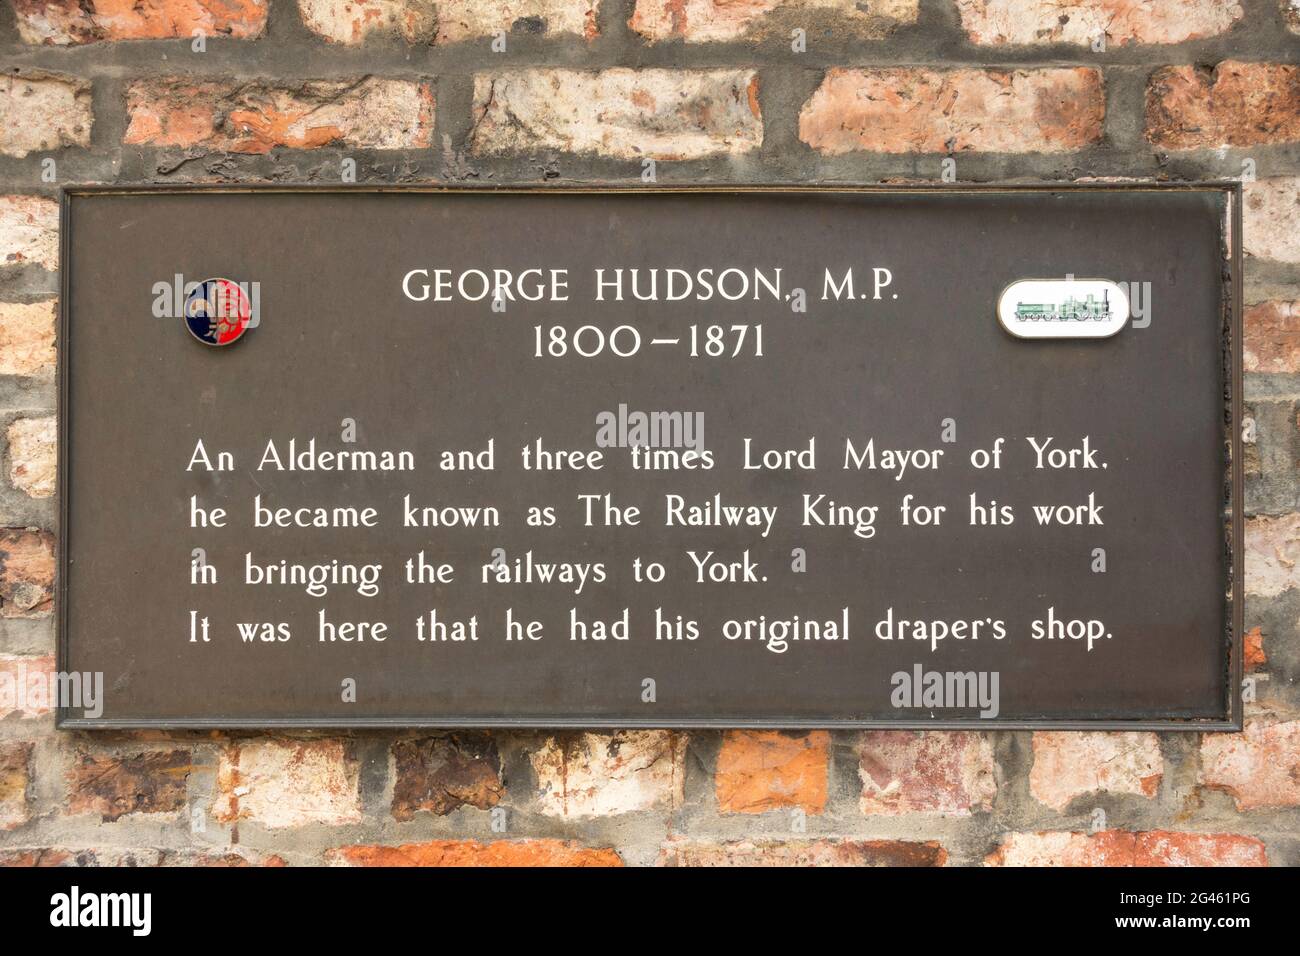 Plaque relating to George Hudson, The Railway King, mounted at the site of his drapers shop in College Street, York, Yorkshire, England, UK Stock Photo